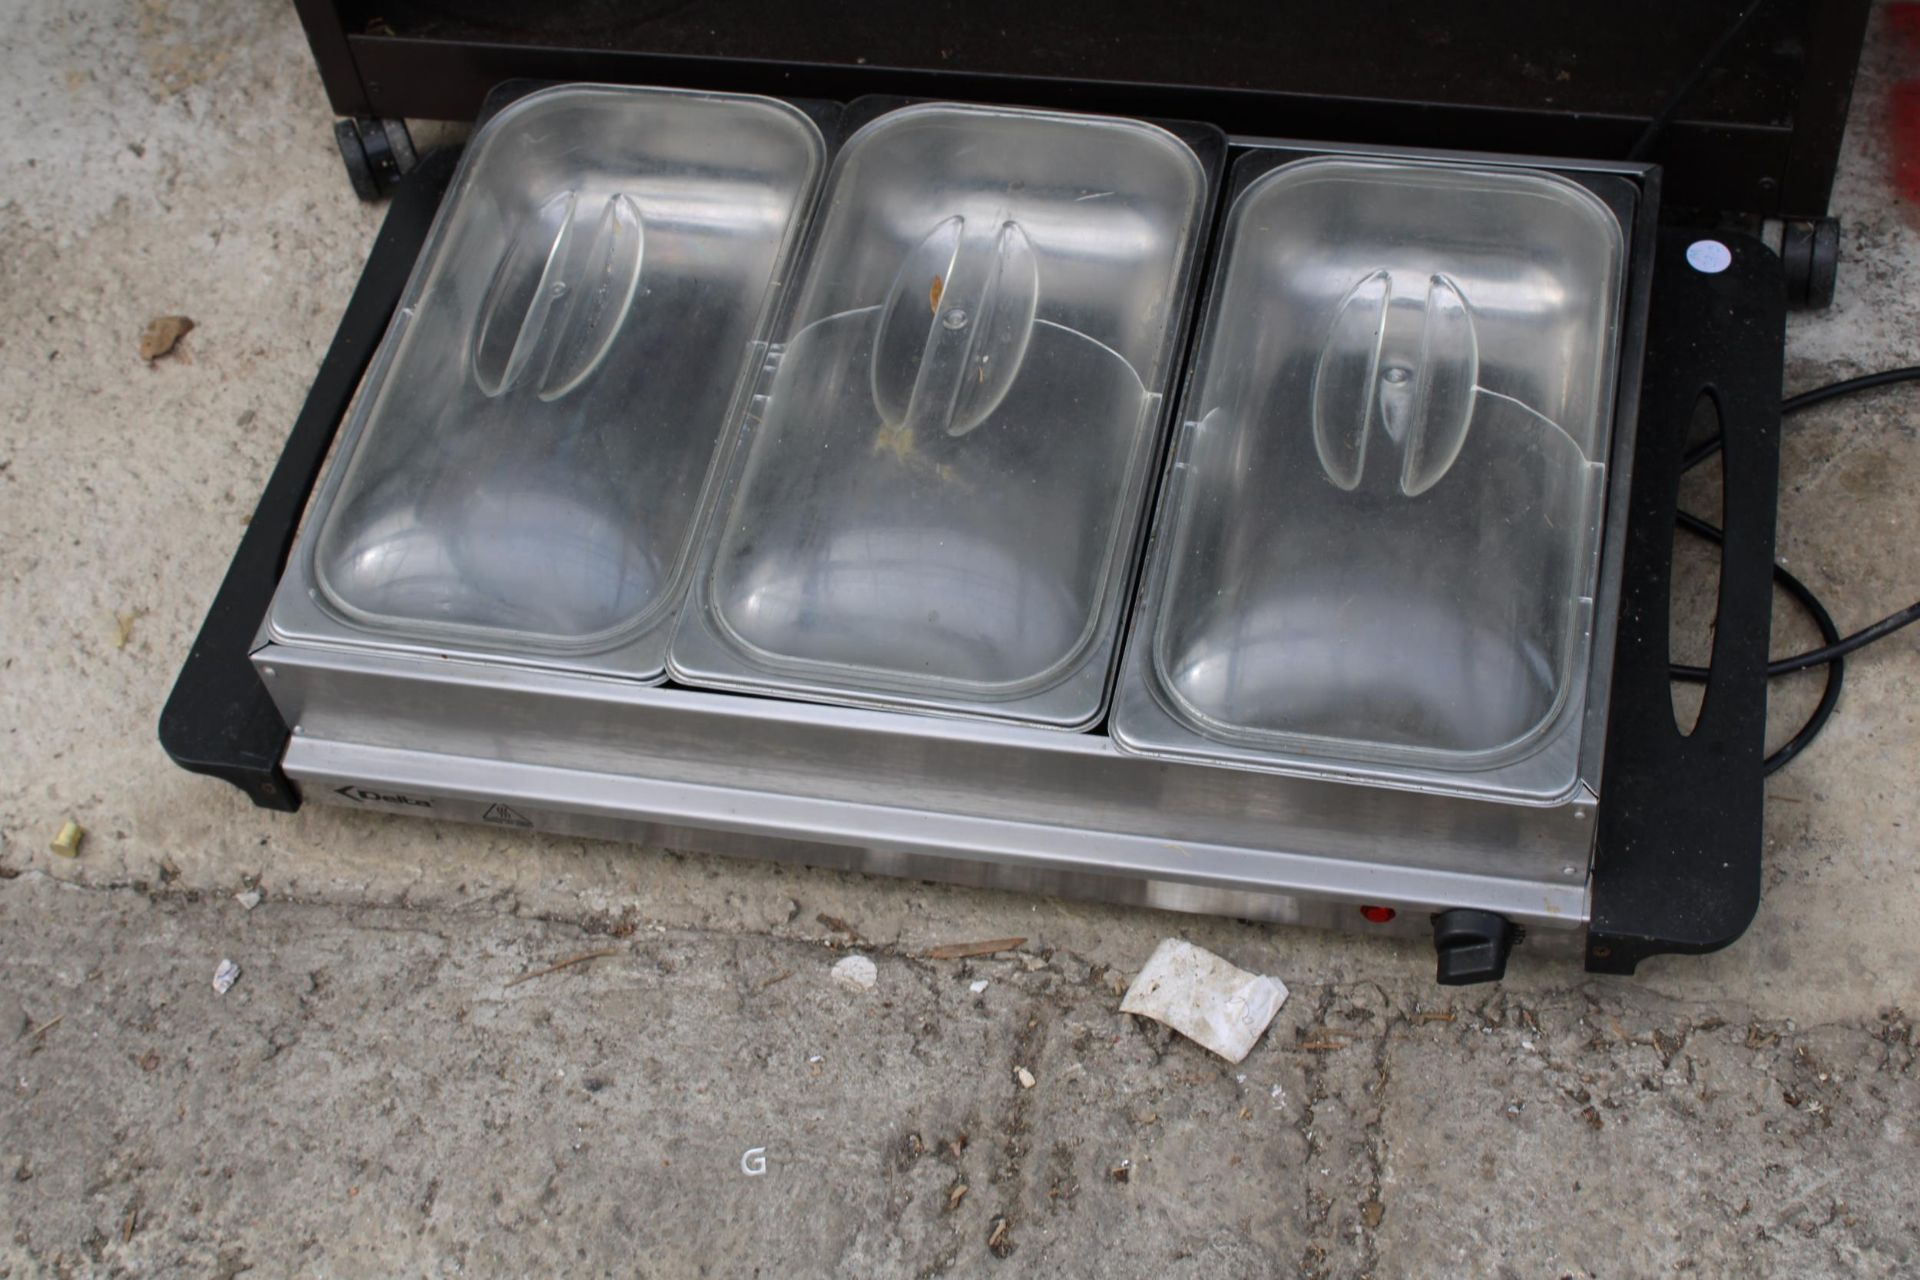 TWO ELECTRIC HOT PLATE FOOD WARMERS TO INCLUDE A HOSTESS TROLLEY AND A STAINLESS STEEL DELTA HOT - Image 2 of 5